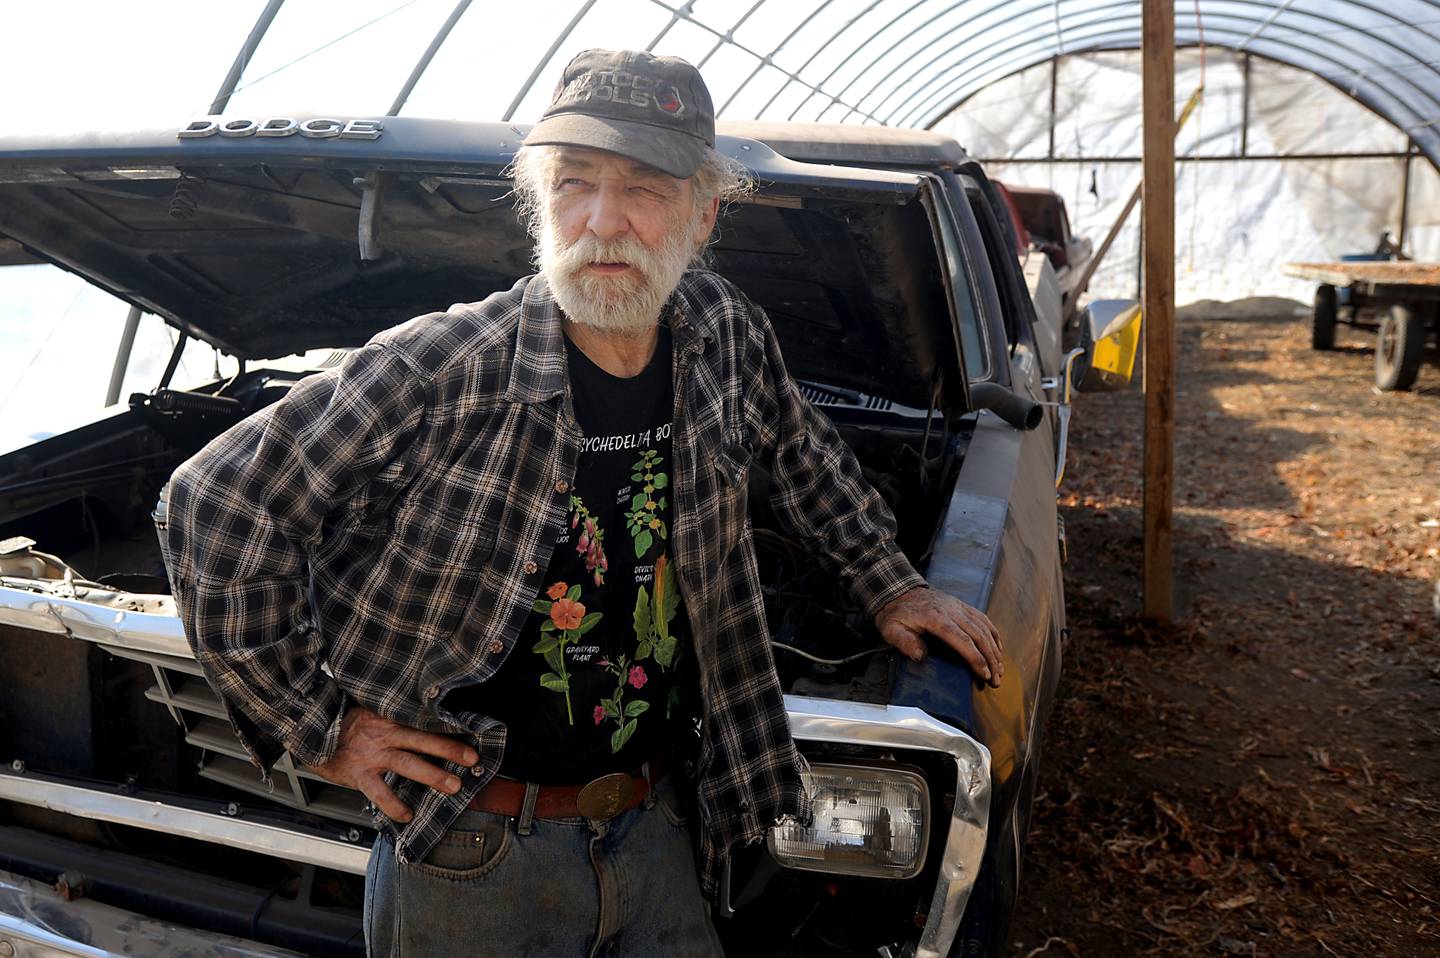 Gary Gauger, 70, takes a break from working on a truck Monday, Feb. 28, 2022, on his farm near Richmond. He was wrongfully convicted in his parents' murder and then exonerated after members of the Outlaw motorcycle gang were named and convicted. One of those bikers was recently denied in his request for compassionate release from prison. Gauger still lives and farms near the property his parents owned and where they were killed.